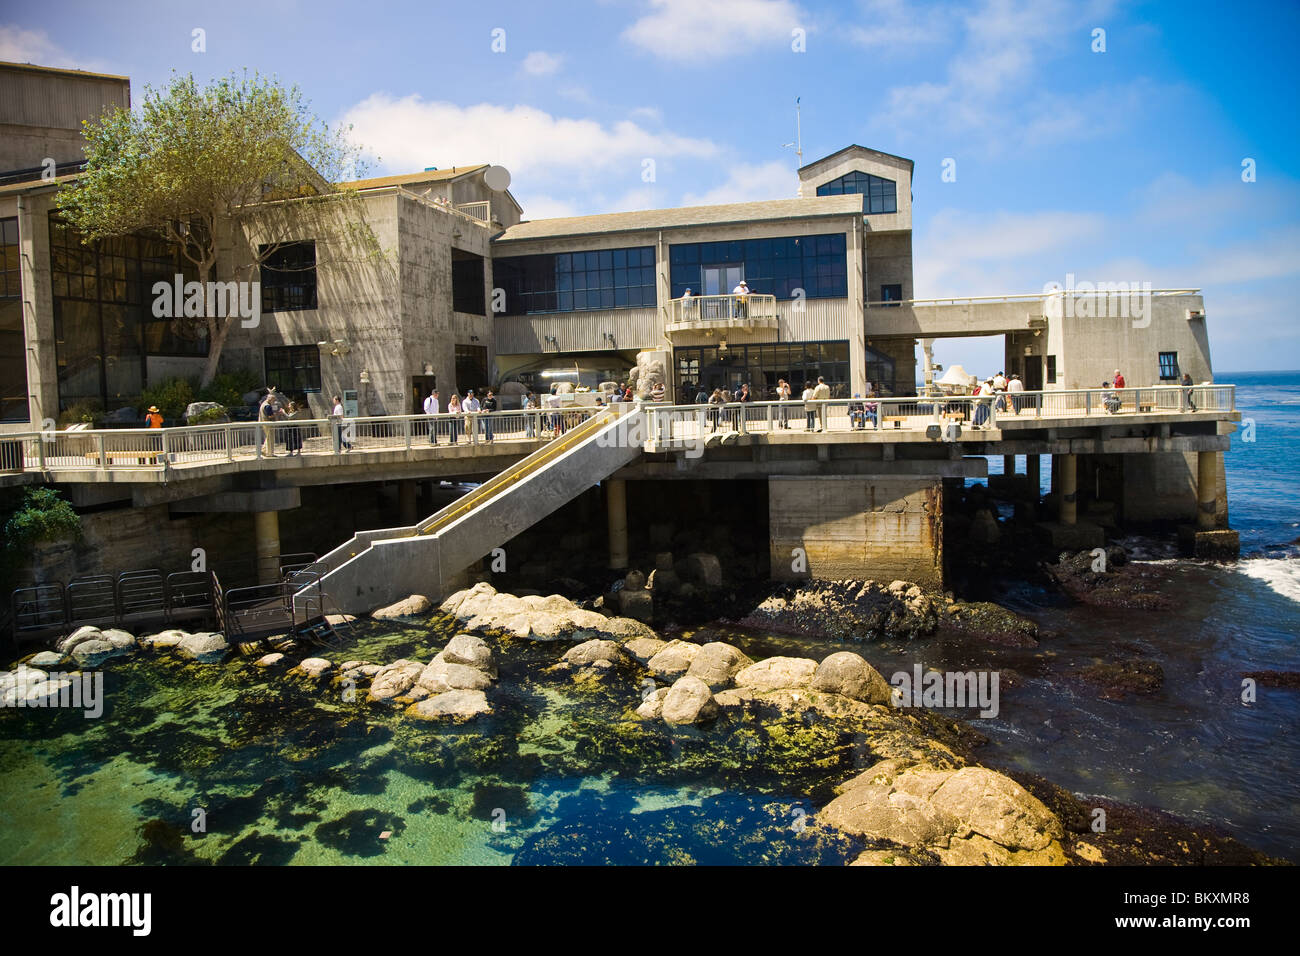 Monterey Bay Aquarium is home to more than 30,000 marine creatures birds mammals and plants Stock Photo